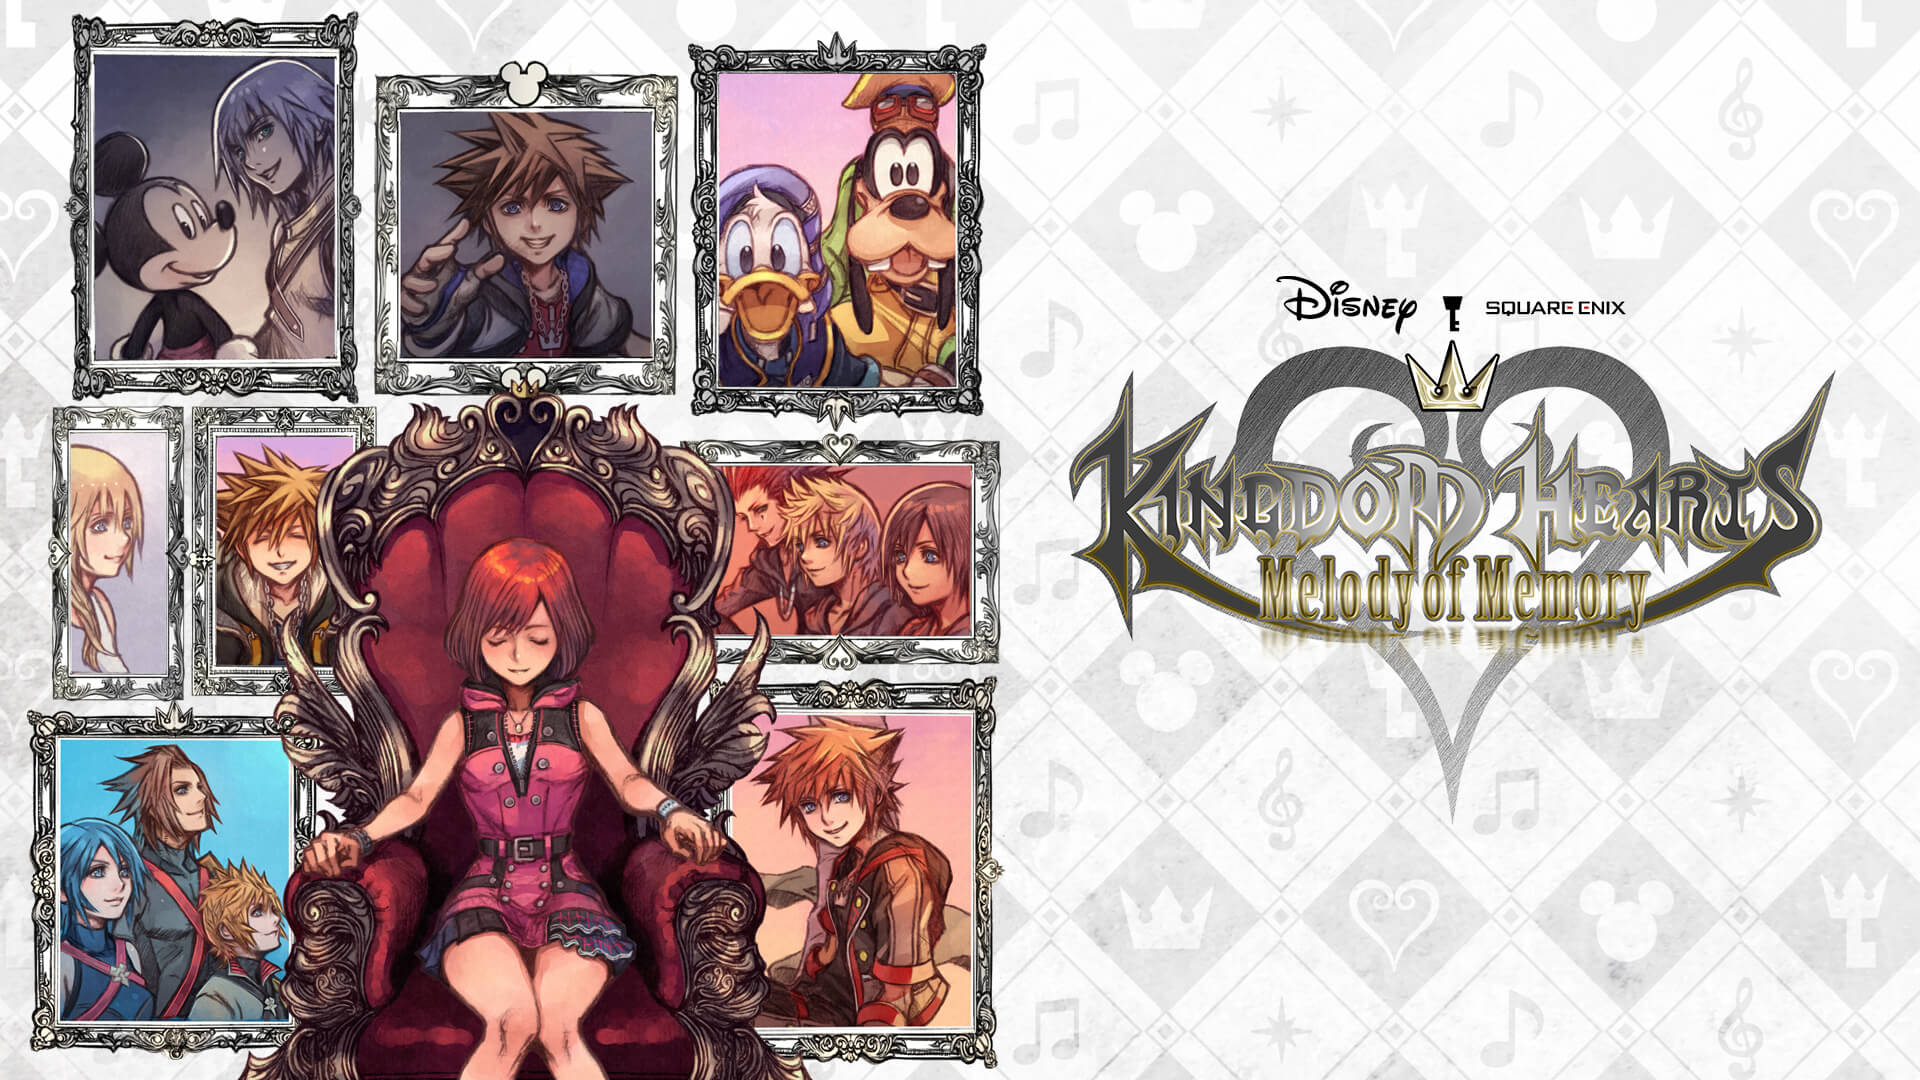 Kingdom Hearts: Melody of Memory Free PC Download